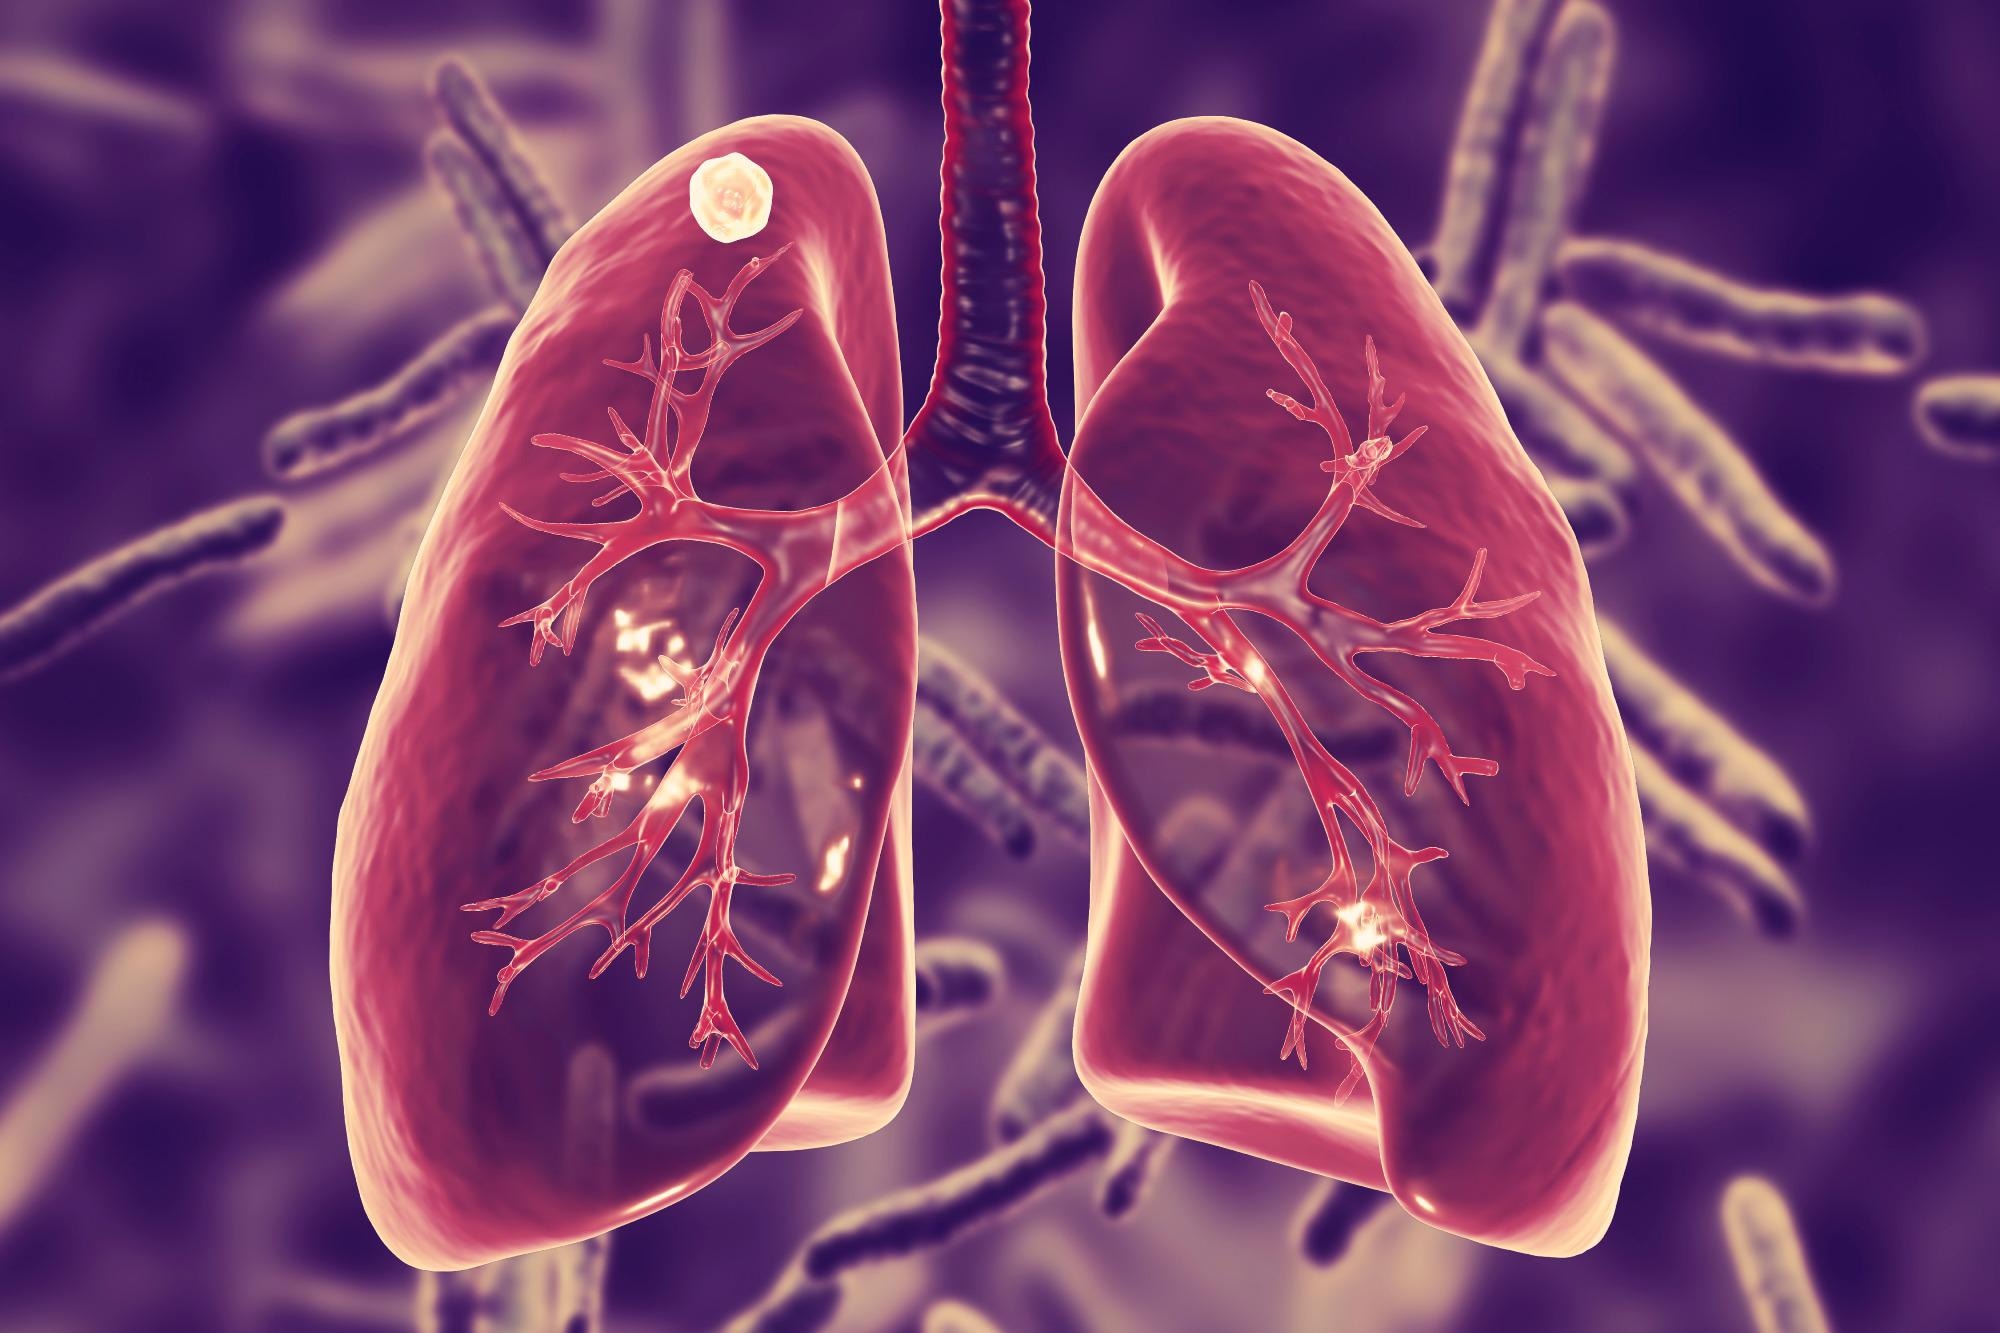 Researchers Use AI to Predict Cancer Risk of Lung Nodules